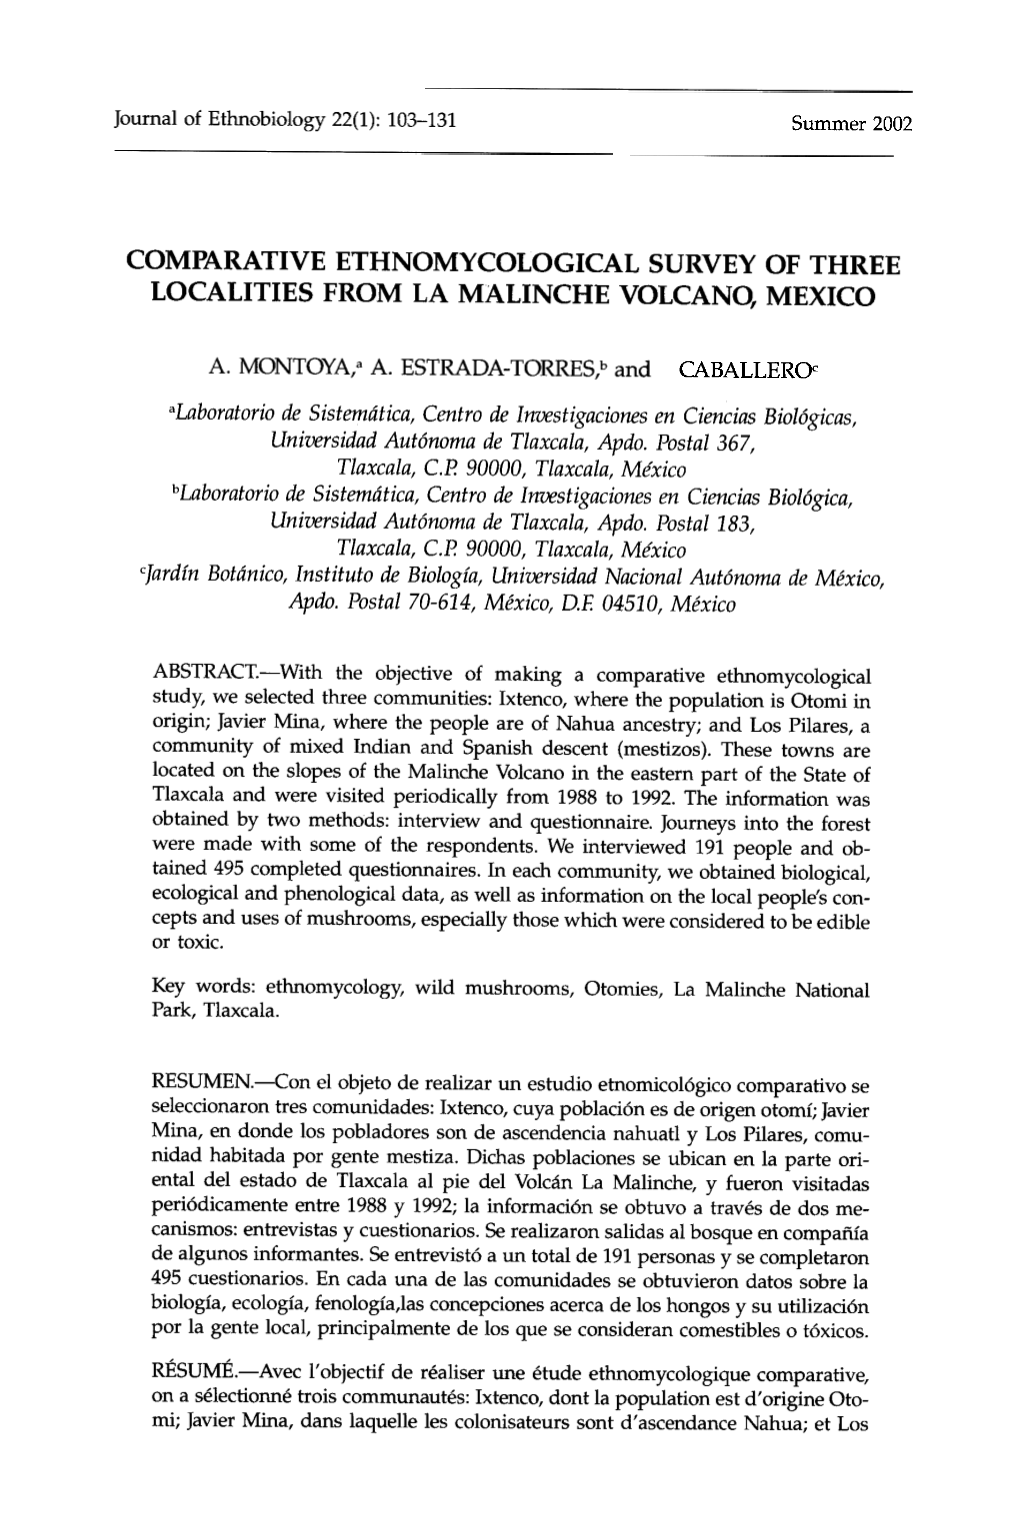 Comparative Ethnomycological Survey of Three Localities from La Malinche Volcano, Mexico